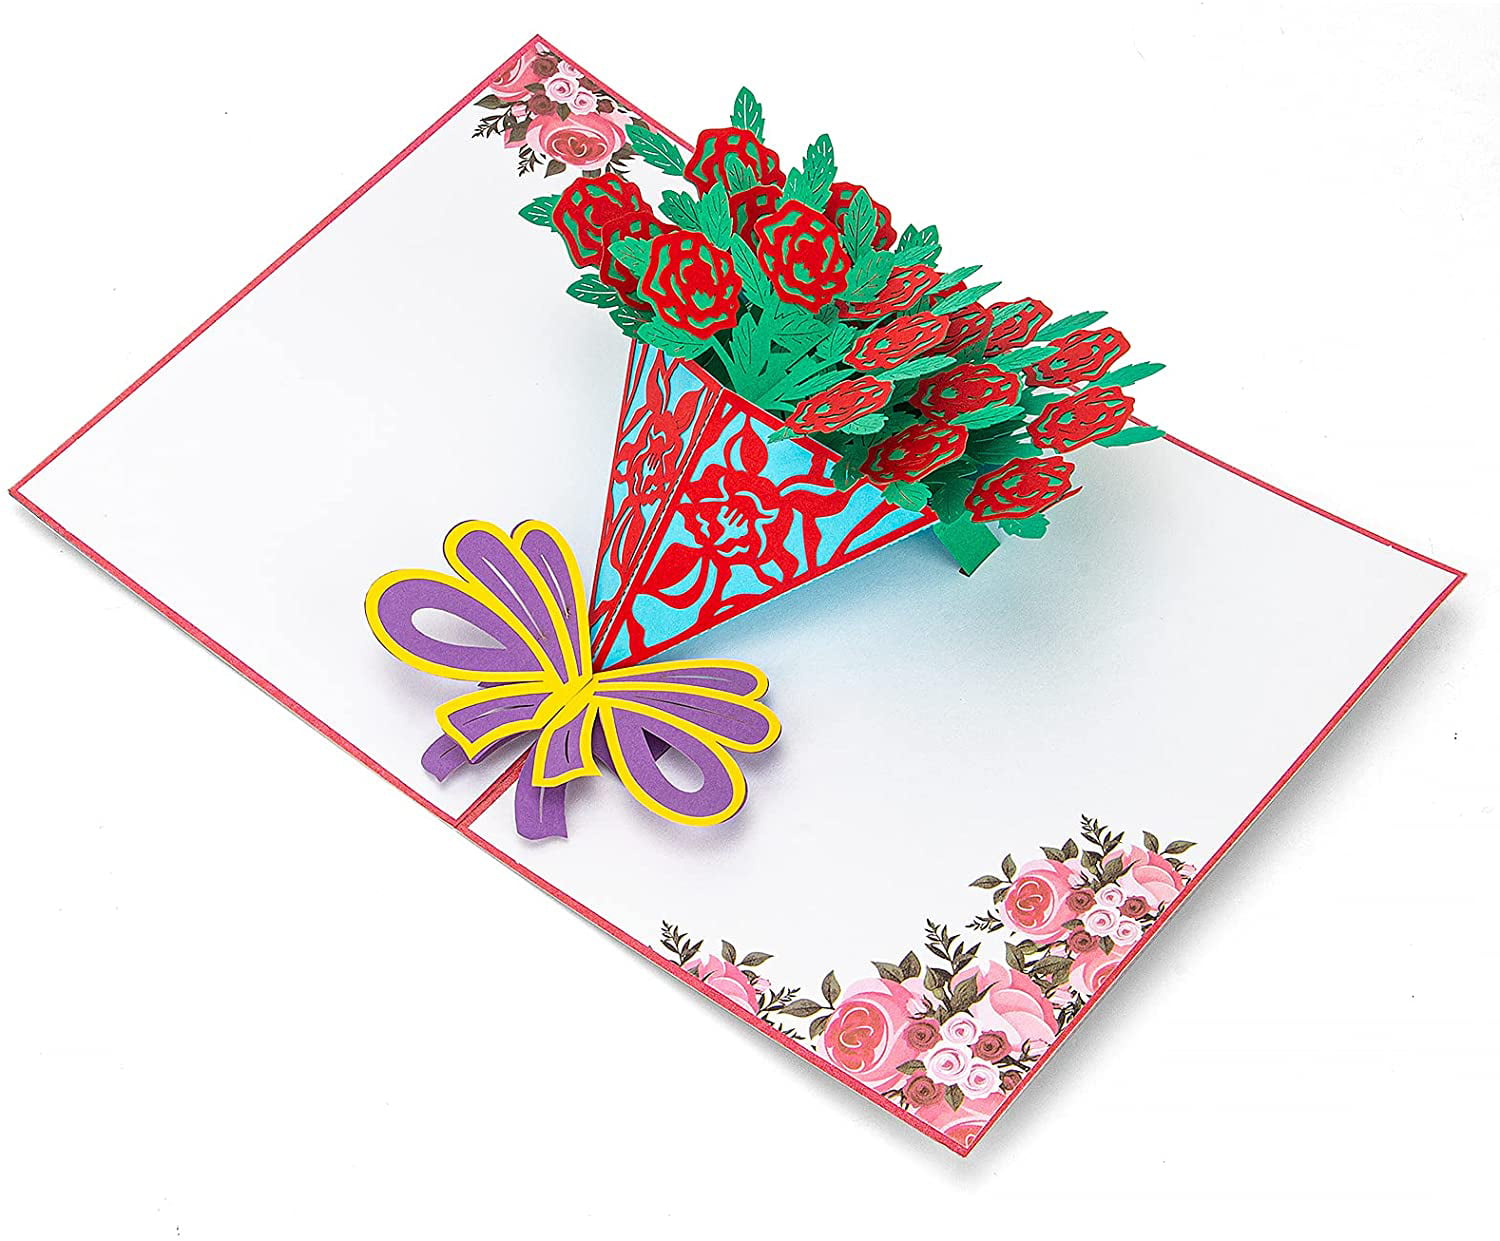 igloofy 3d Pop up Cards ; Gifts for Grandma; Paper Flowers ; Paper Bouquet  ; Birthday Cards ;Blank Gift Card Congratulations Greetings 12 inch Crafts